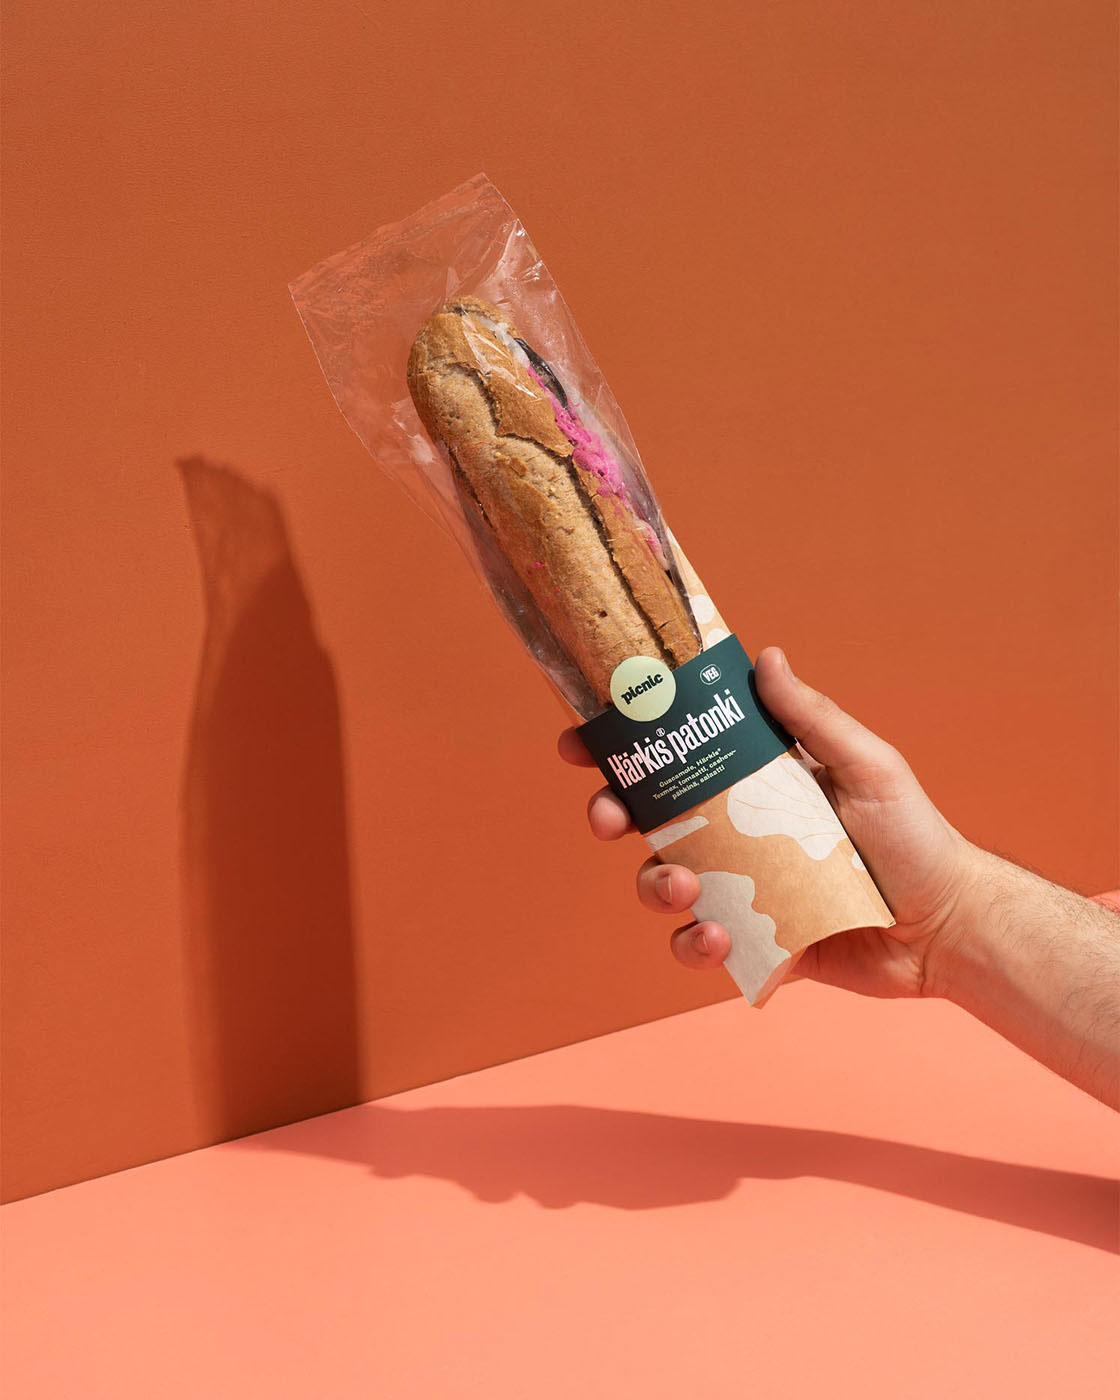 a hand holding a baguette wrapped in fresh package on a orange and pink background by Tomas Olsen